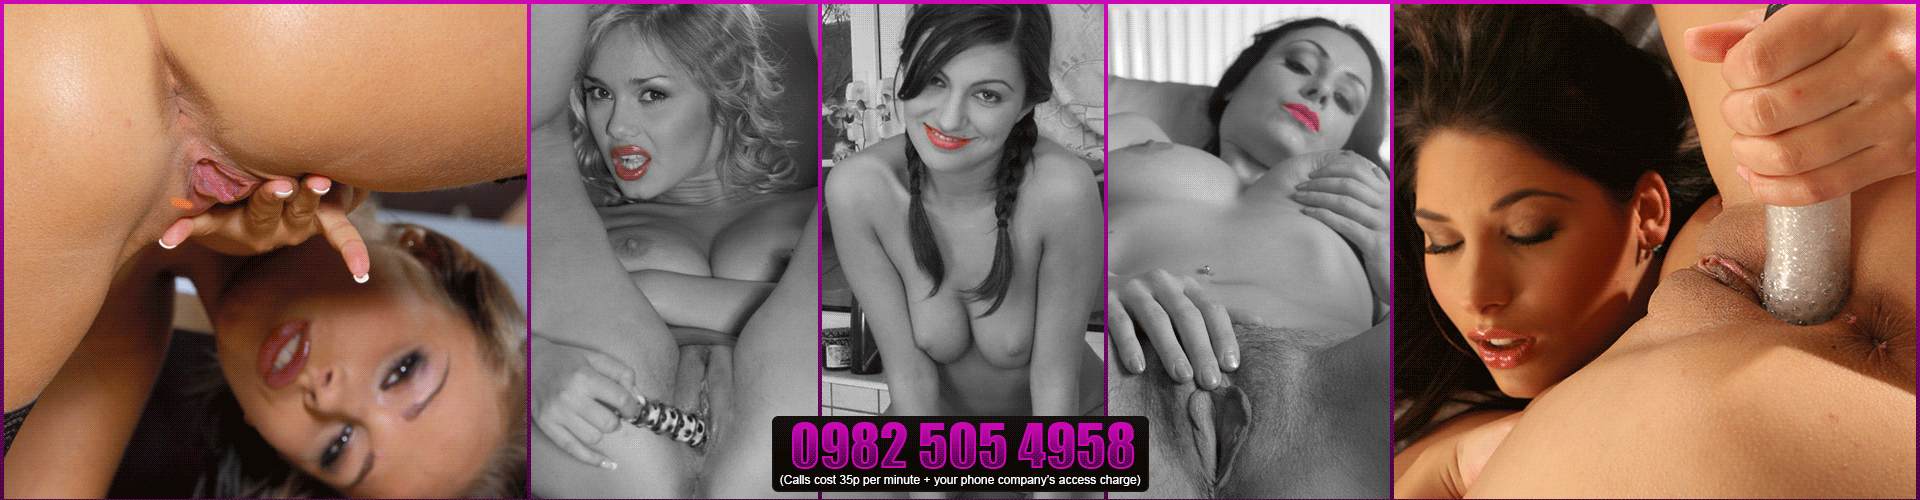 cheaptest uk phone sex chat